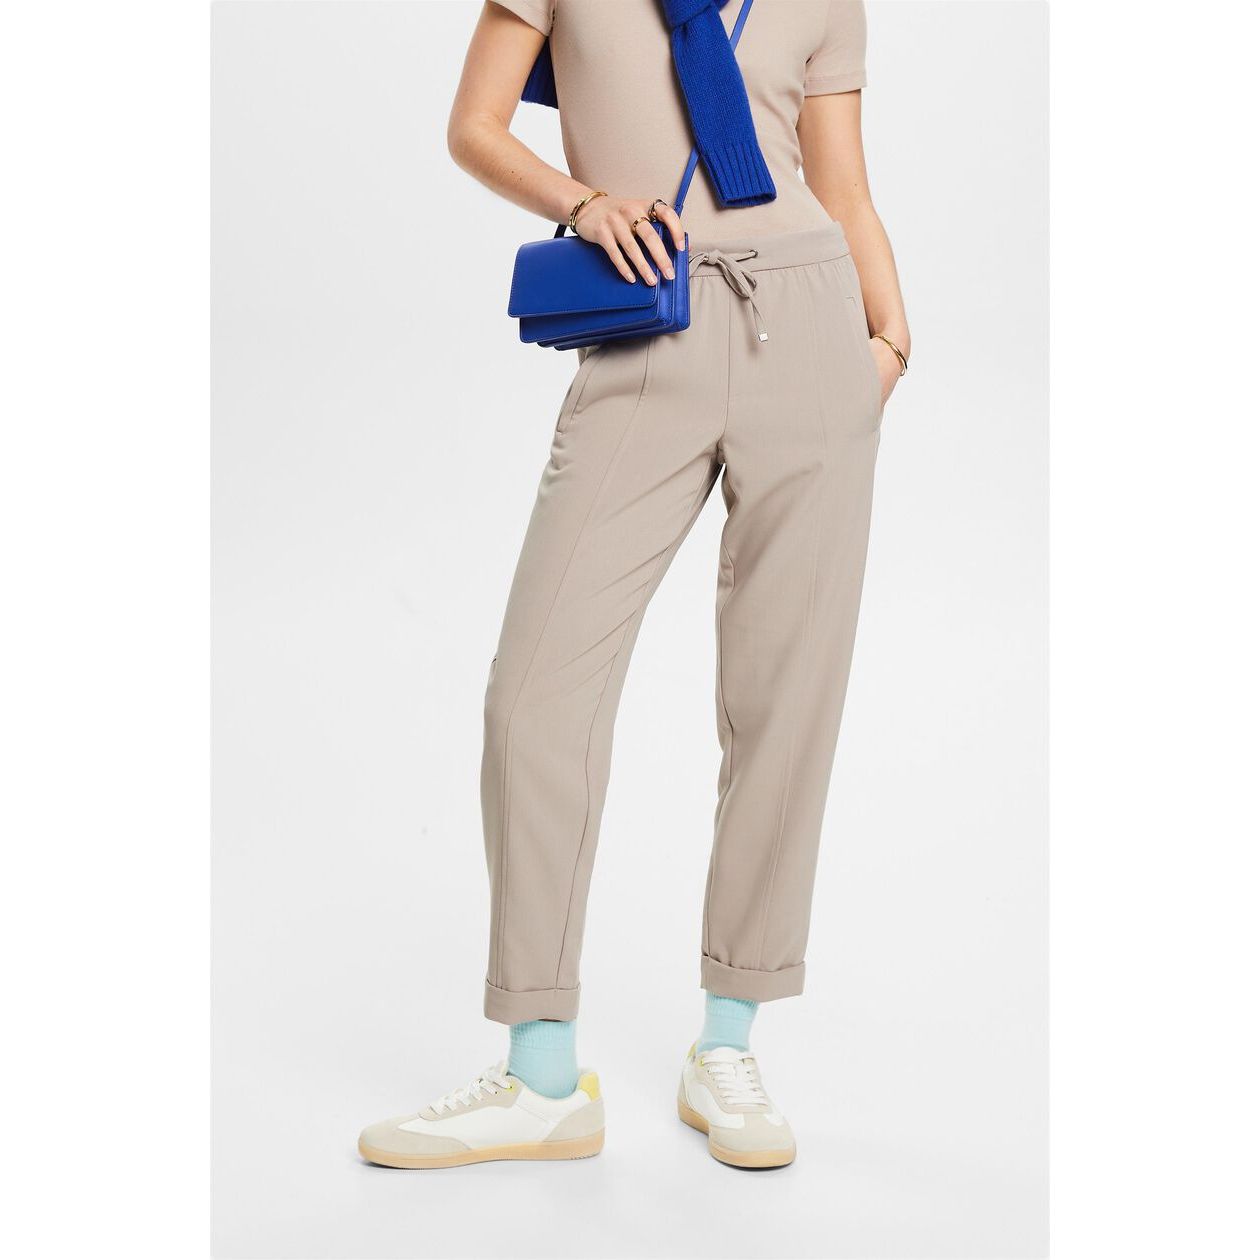 Esprit - Jogger Style Trouser in Light Taupe